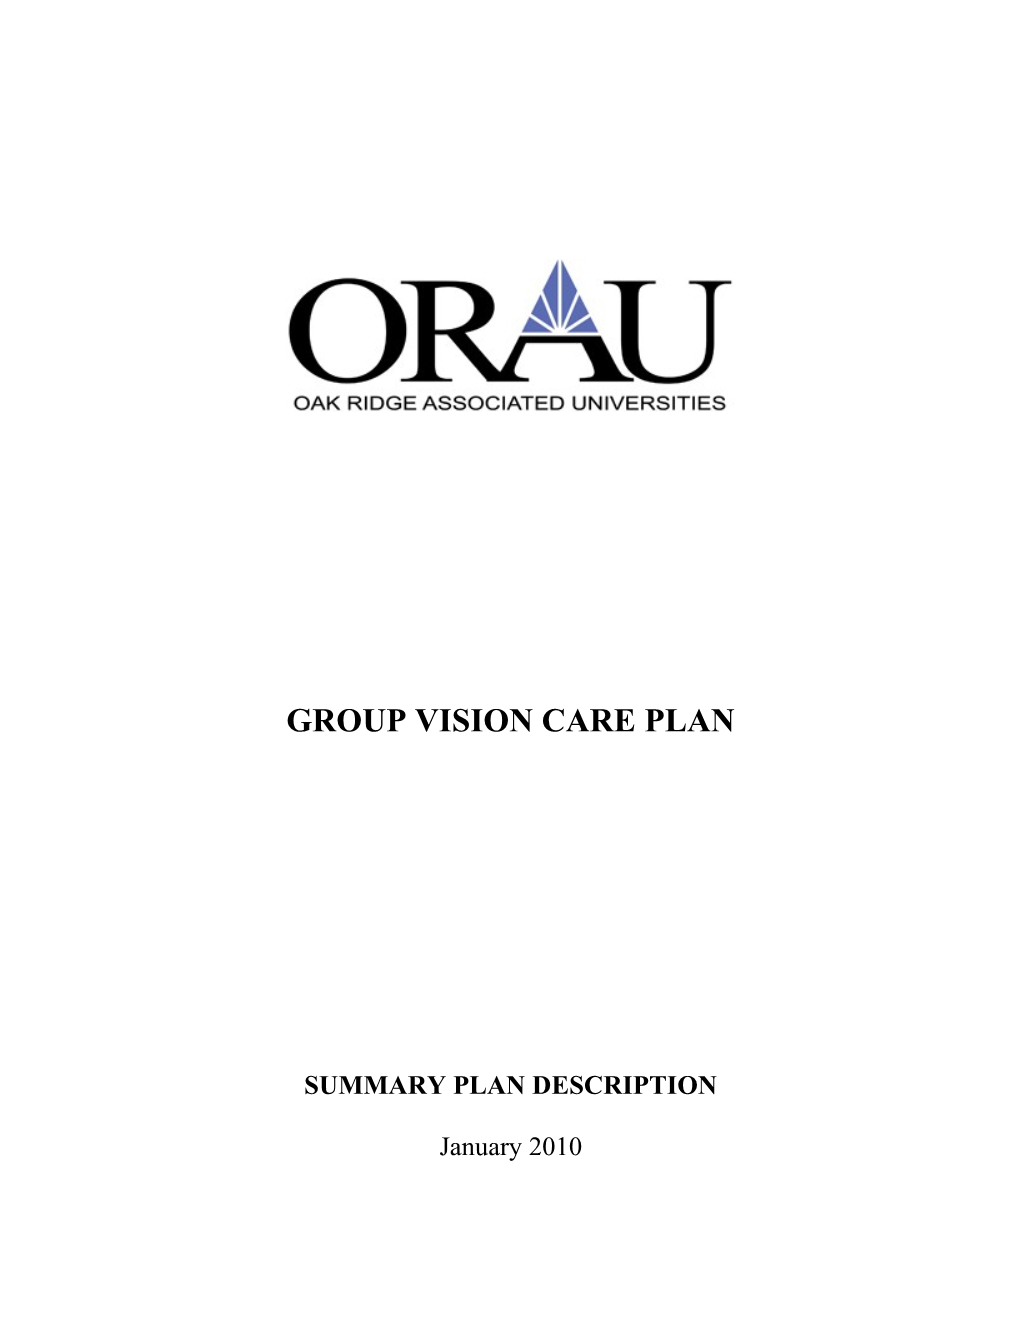 Group Vision Care Plan